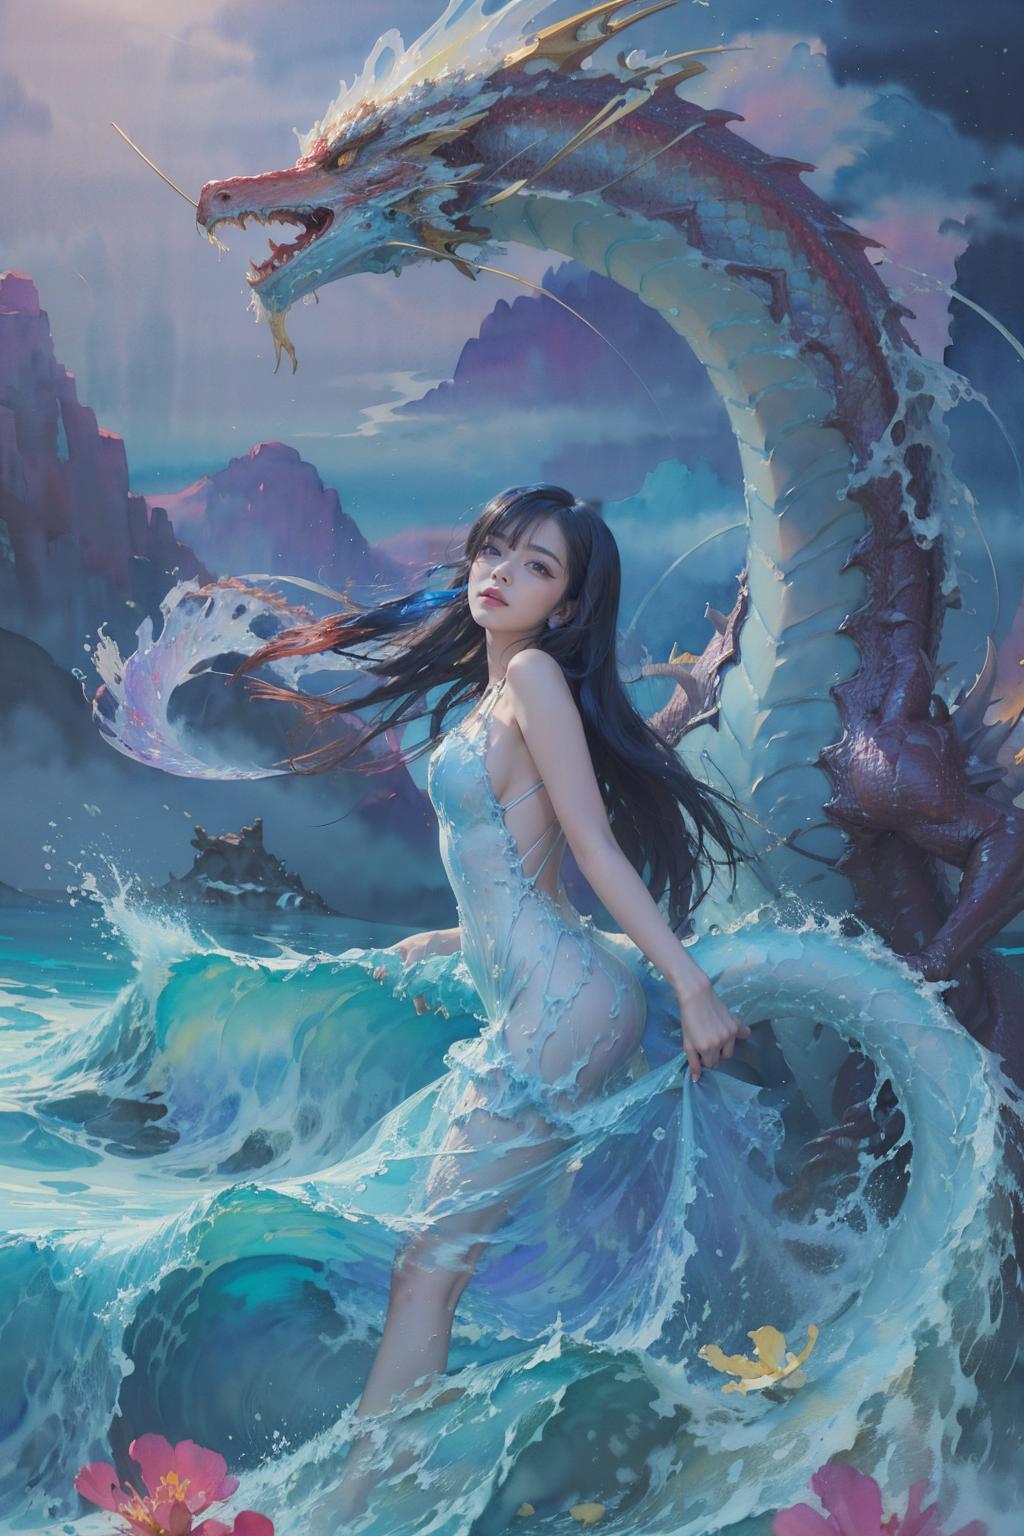 An Artistic Painting of a Girl in a Swimsuit with a Dragon in the Ocean